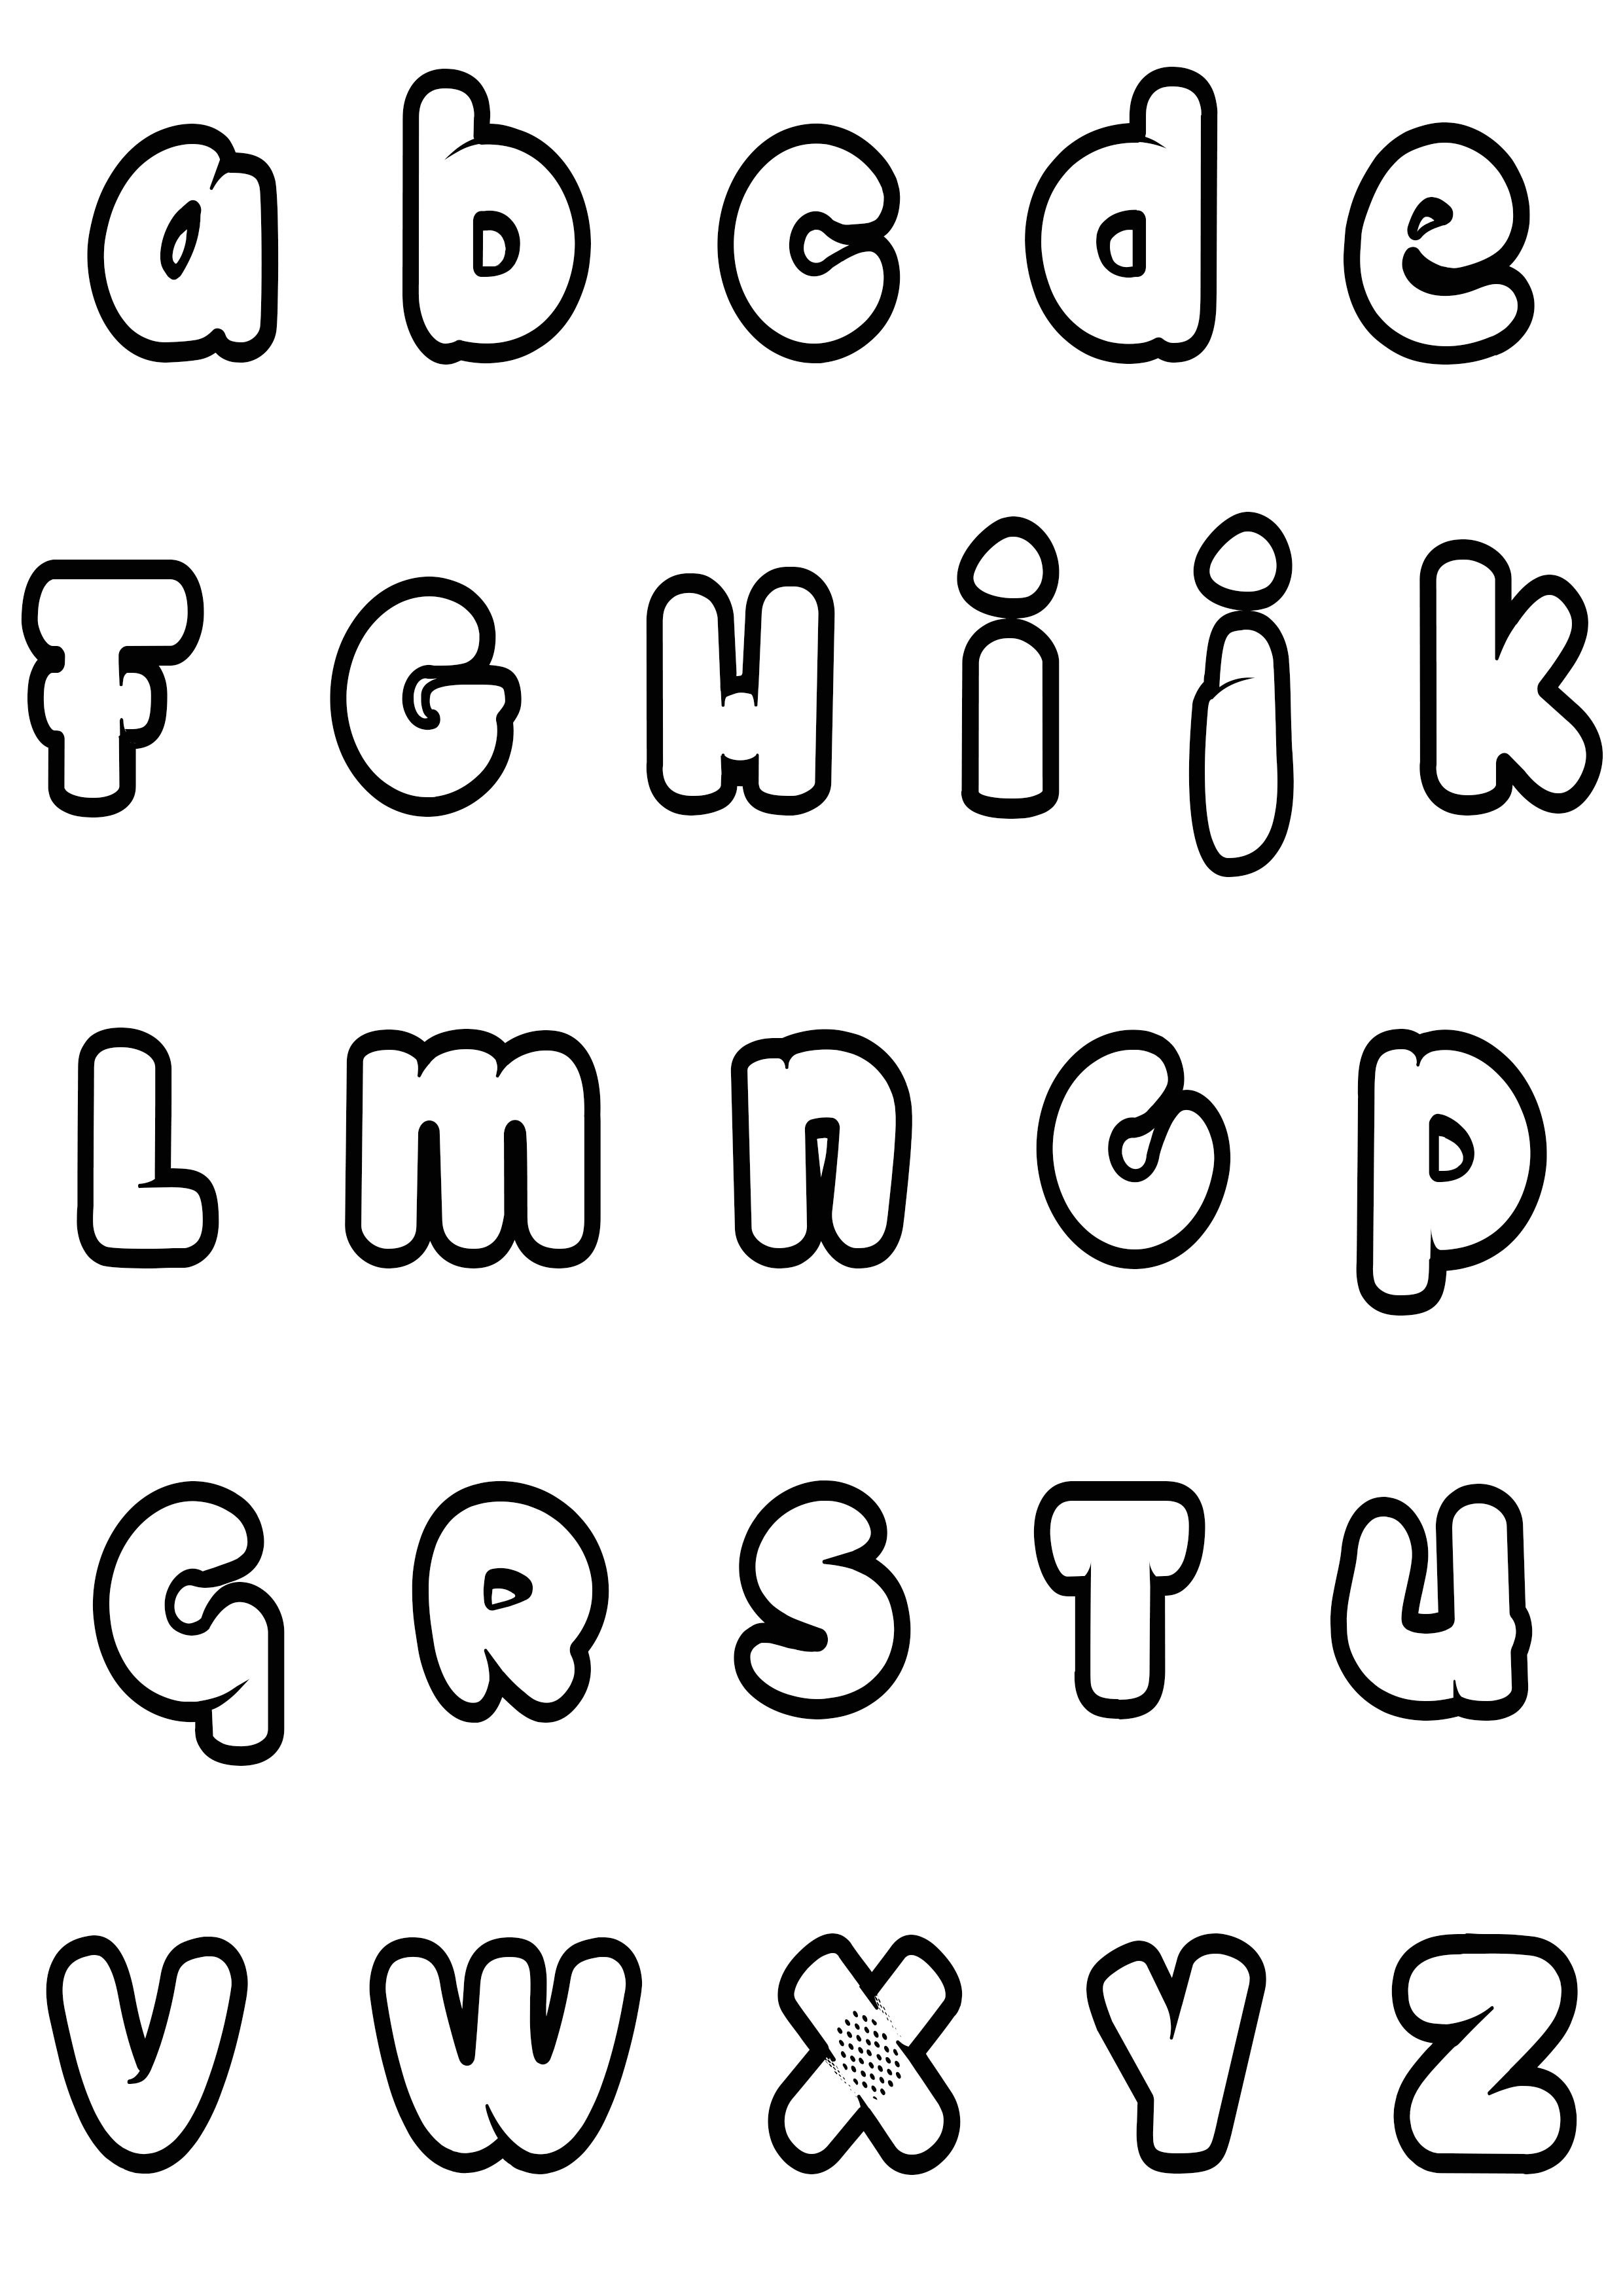 Download Simple alphabet 14 - Alphabet Coloring pages for kids to print & color